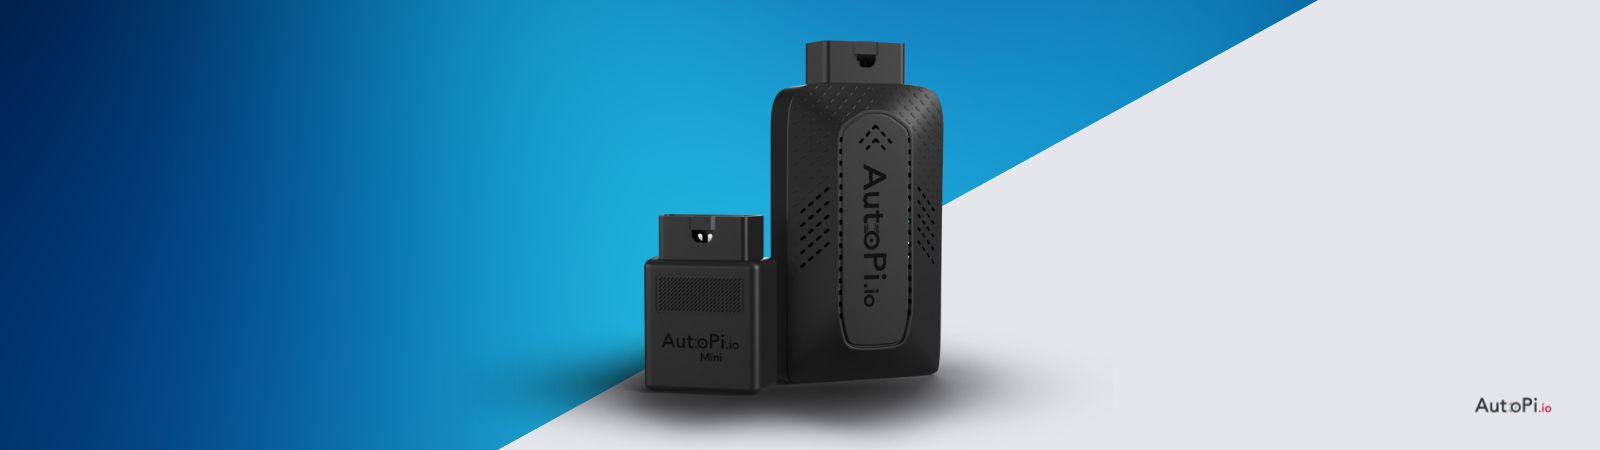 visual presentation of the autopi cm4 and autopi mini beside each other